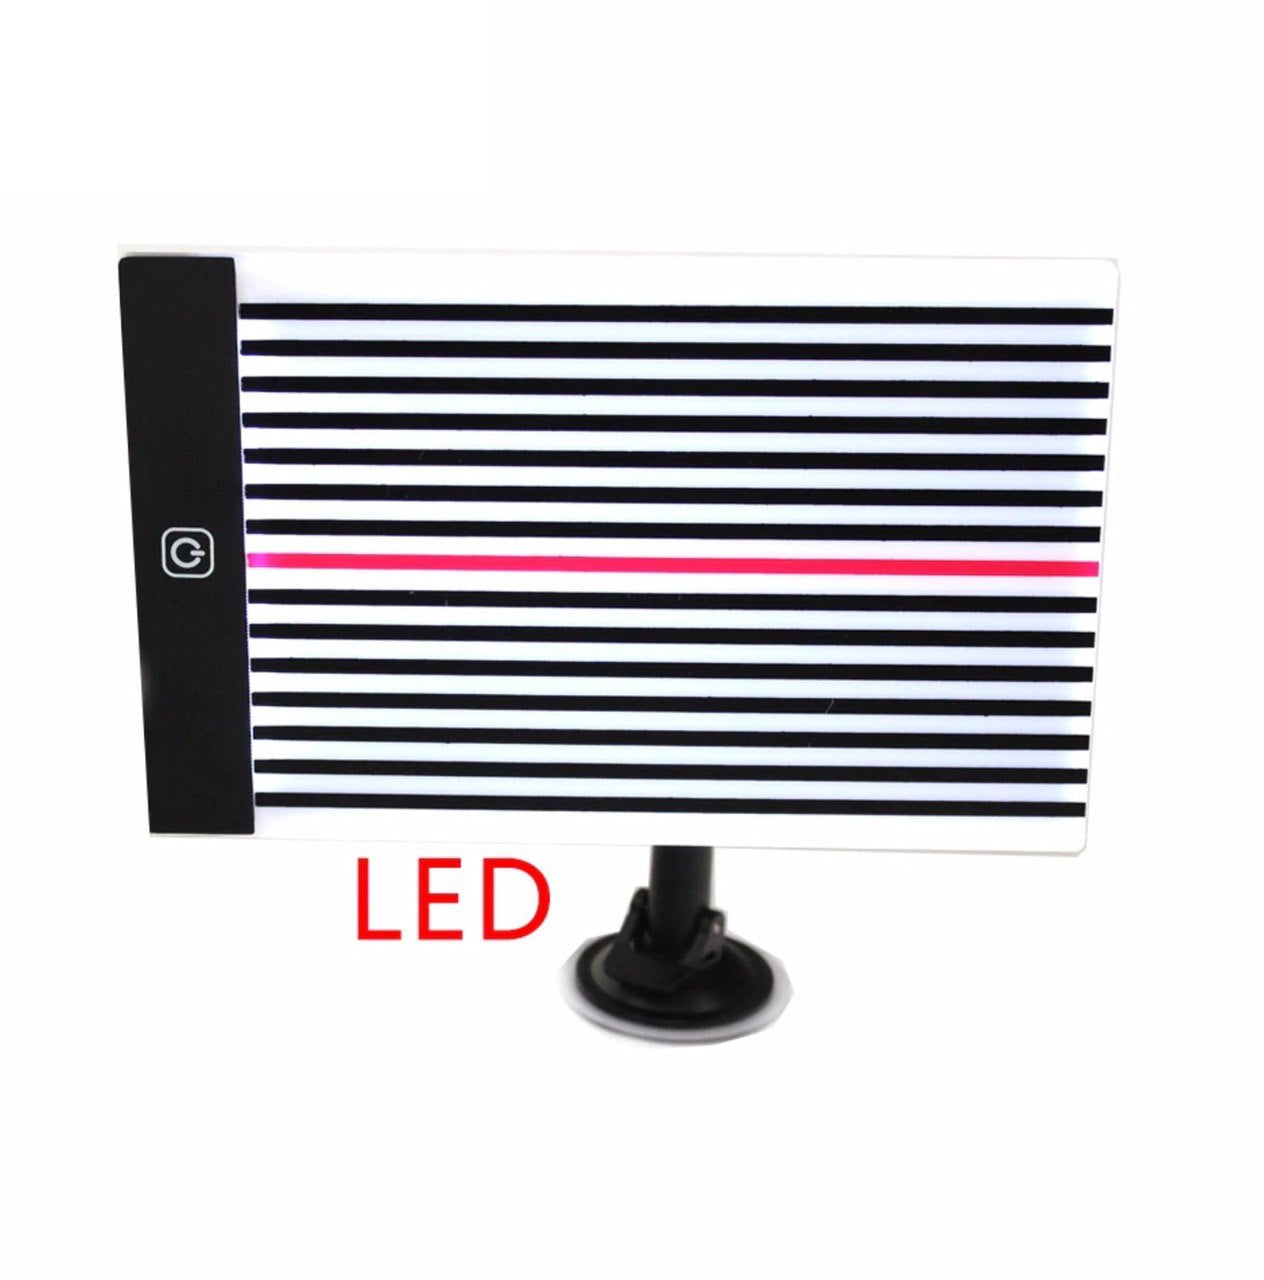 USB PDR Lamp Board Reflection Board with Adjustable Holder PDR light high quality LED lamp